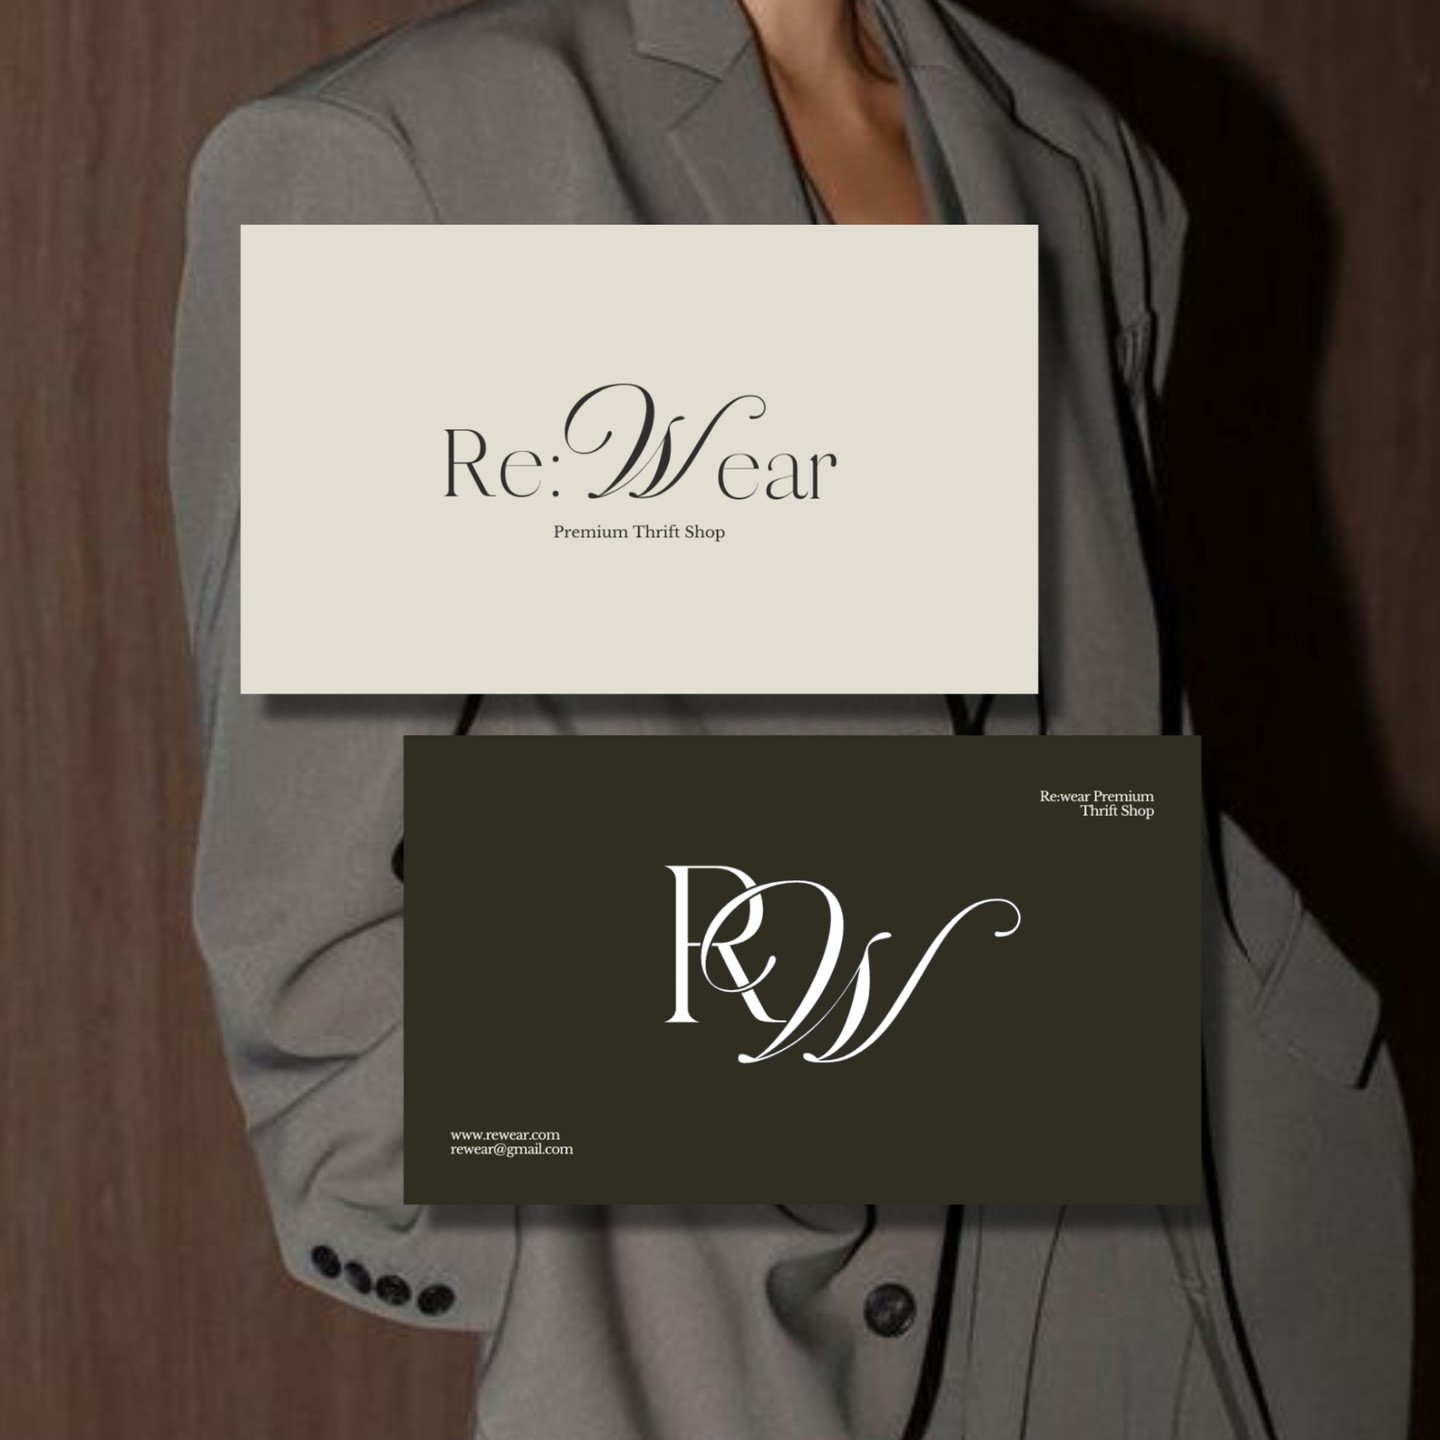 Re:wear—Brand Identity 1/2

A thrift store sells pre-owned clothing and accessories from well-known brands for individua